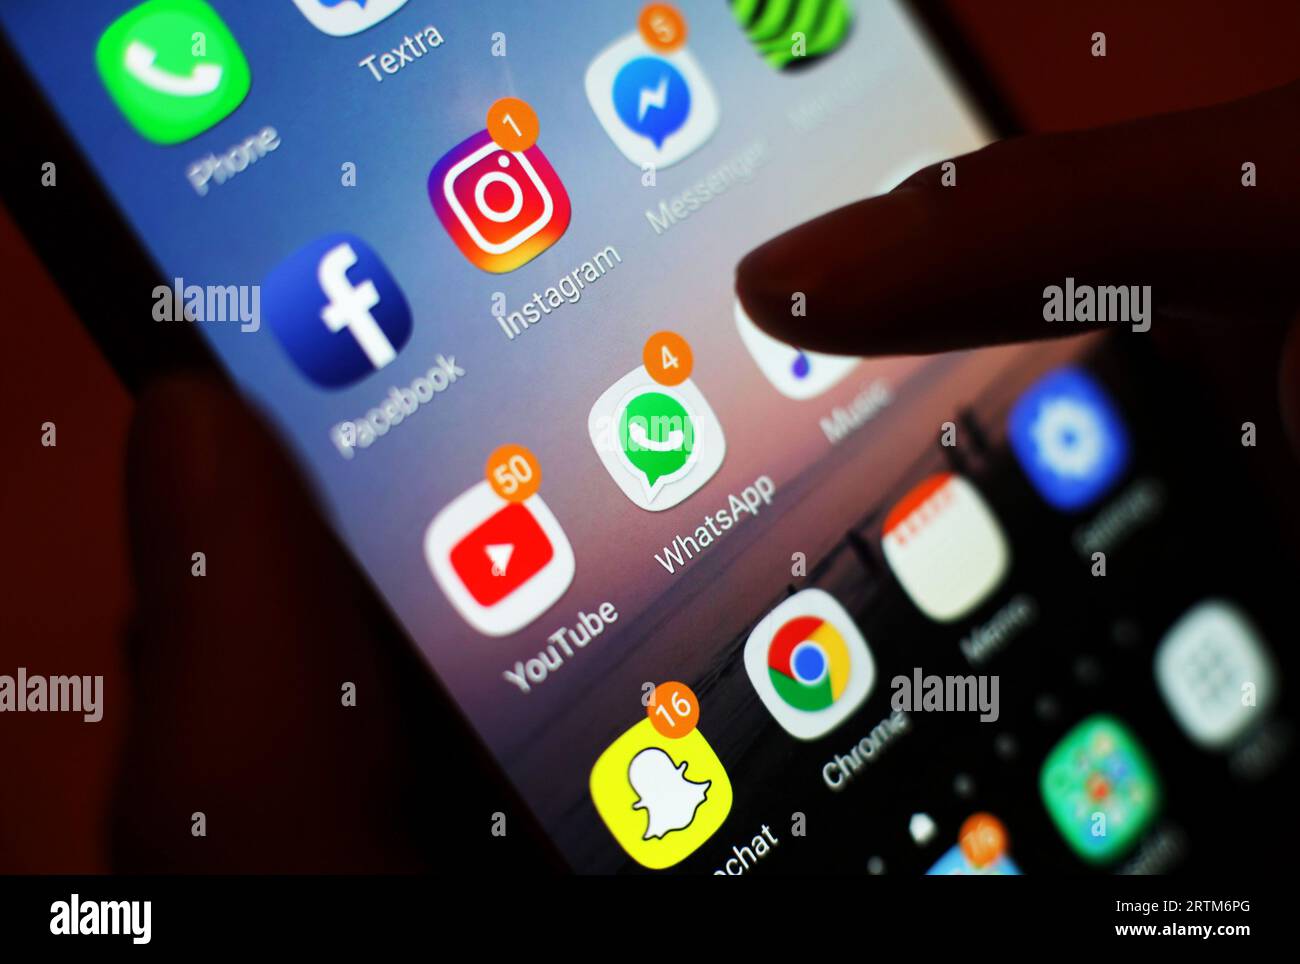 File photo dated 03/01/18 of social media apps, including Facebook, Instagram, YouTube and WhatsApp, displayed on a mobile phone screen. YouTube's UK and Ireland boss has insisted there will always be a future for long-form videos despite increasing competition from the likes of TikTok. Alison Lomax, who took on the post in January this year, told the PA news agency that YouTube is committed to a multi-format proposition, through its traditional longer videos as well as Shorts, launched in 2021 to draw back some of the audiences that had switched to short-form rivals such as TikTok. Issue date Stock Photo